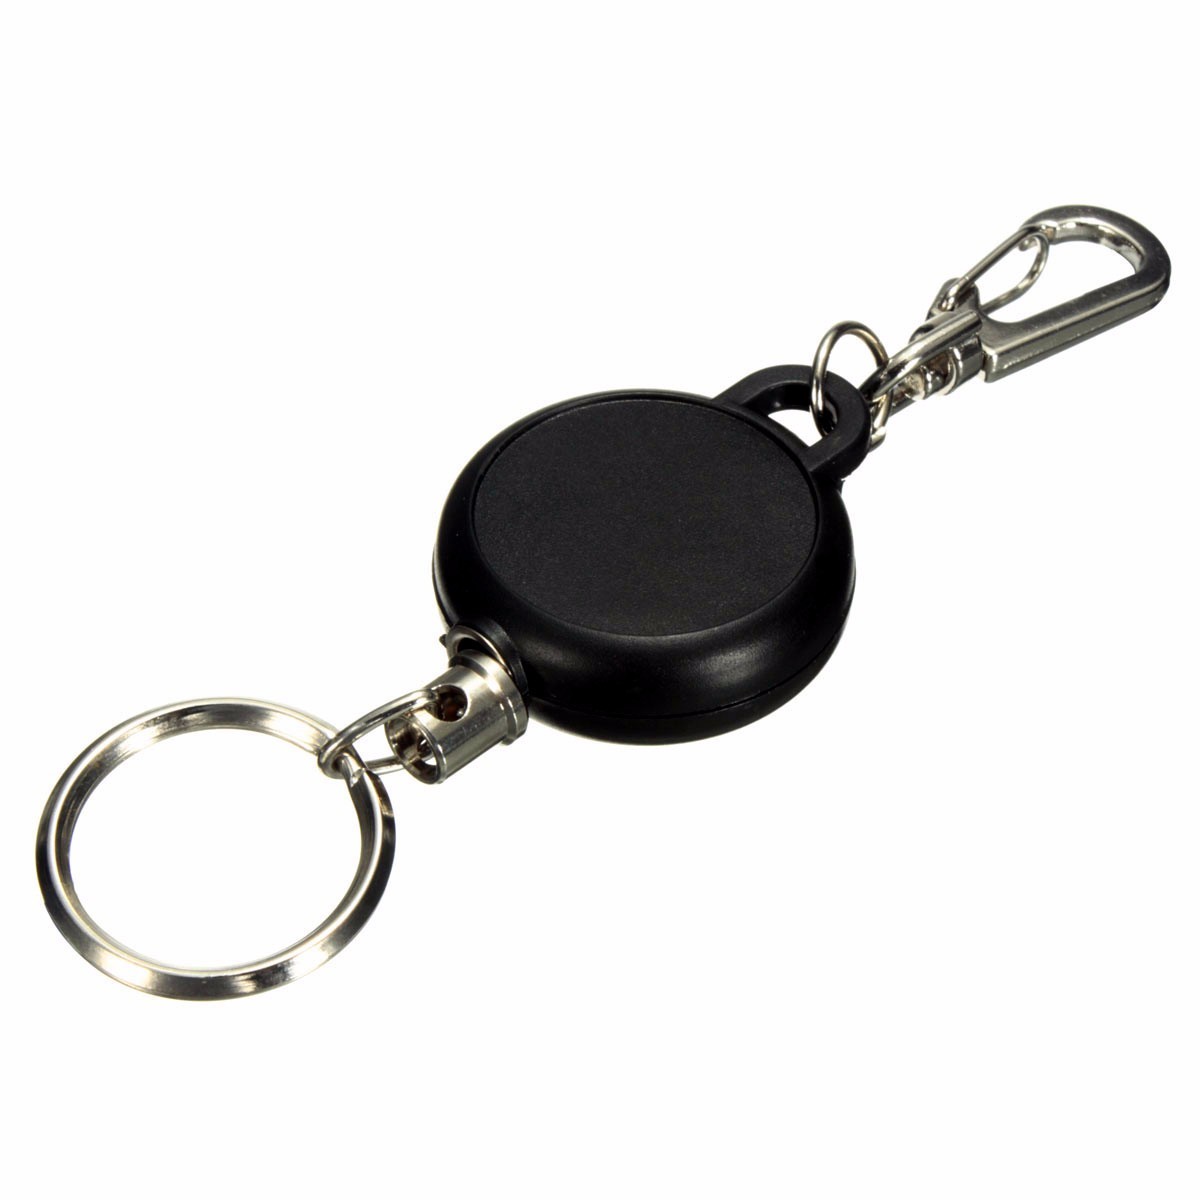 Key Chain Stainless Steel Cord Holder Keyring Reel Retractable Recoil Belt Clip Key Clip 2